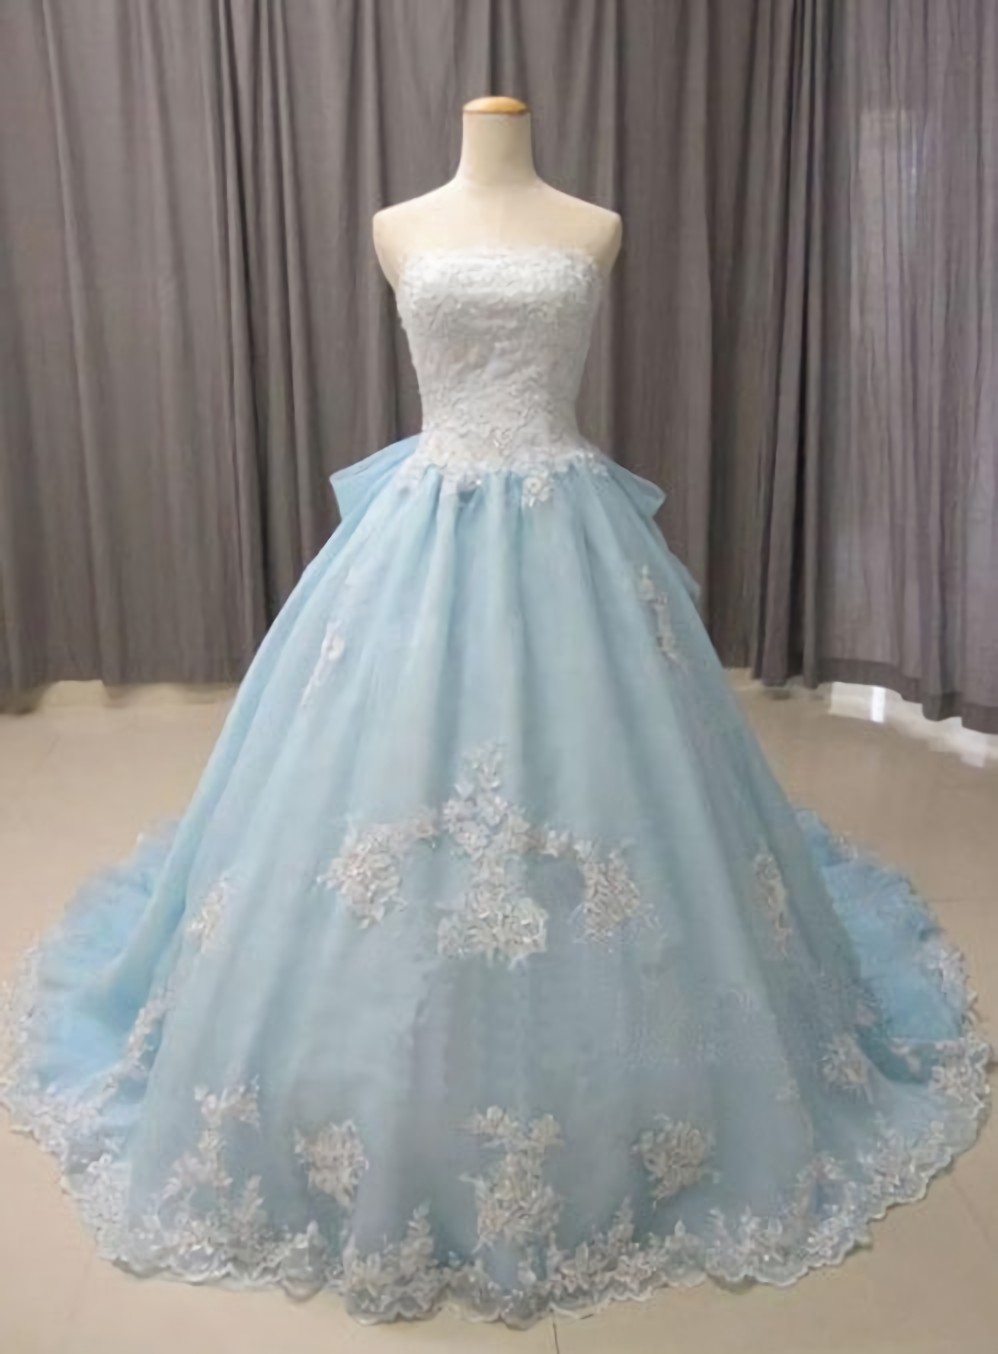 Elegant Sweetheart Strapless Lace Appliques Formal Prom Dress, Beautiful Long Prom Dress, Banquet Party Dress